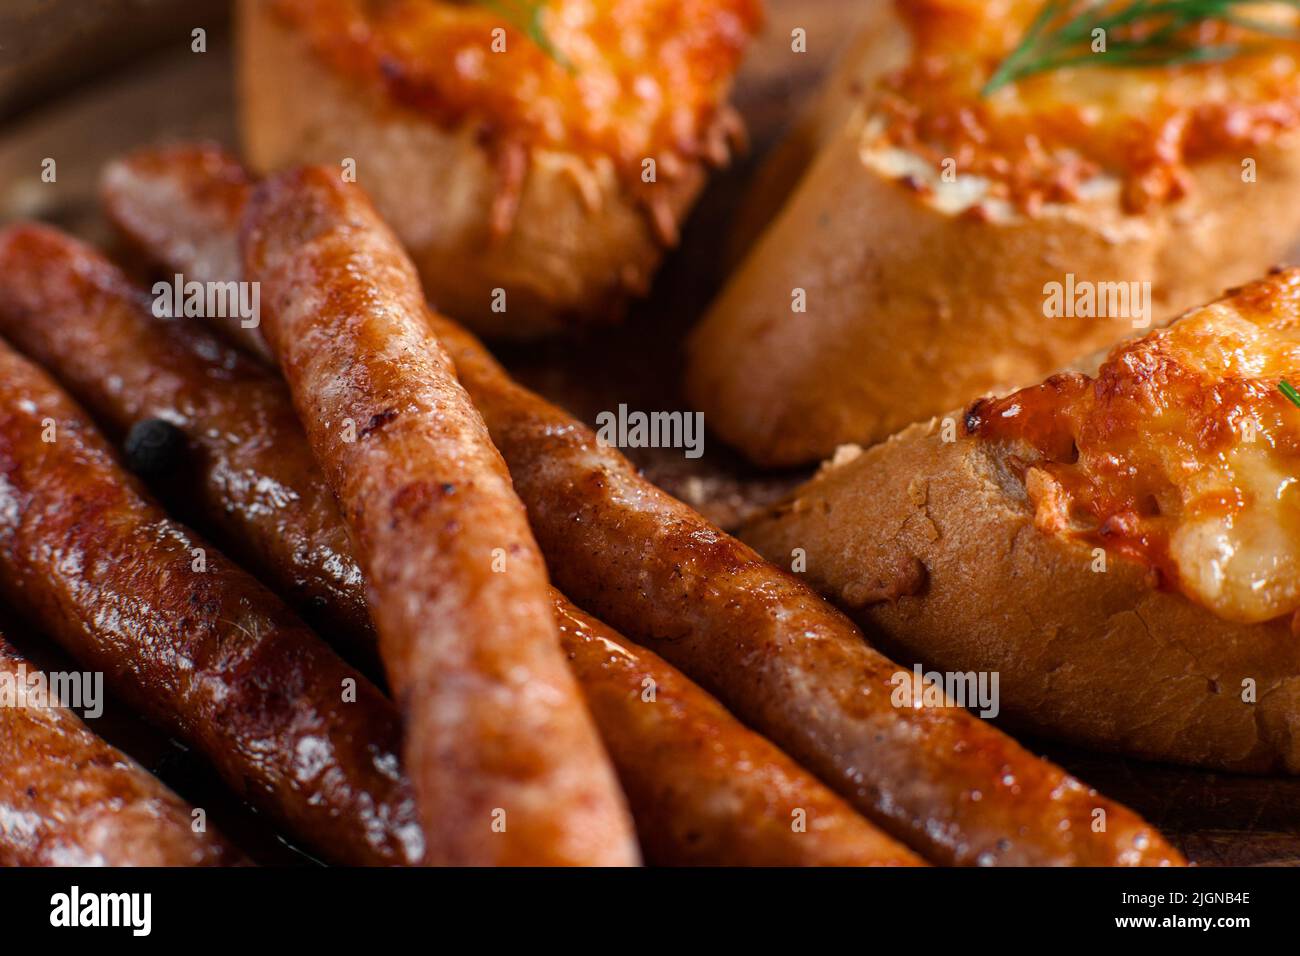 Bavarian sausages with canapes closeup Stock Photo